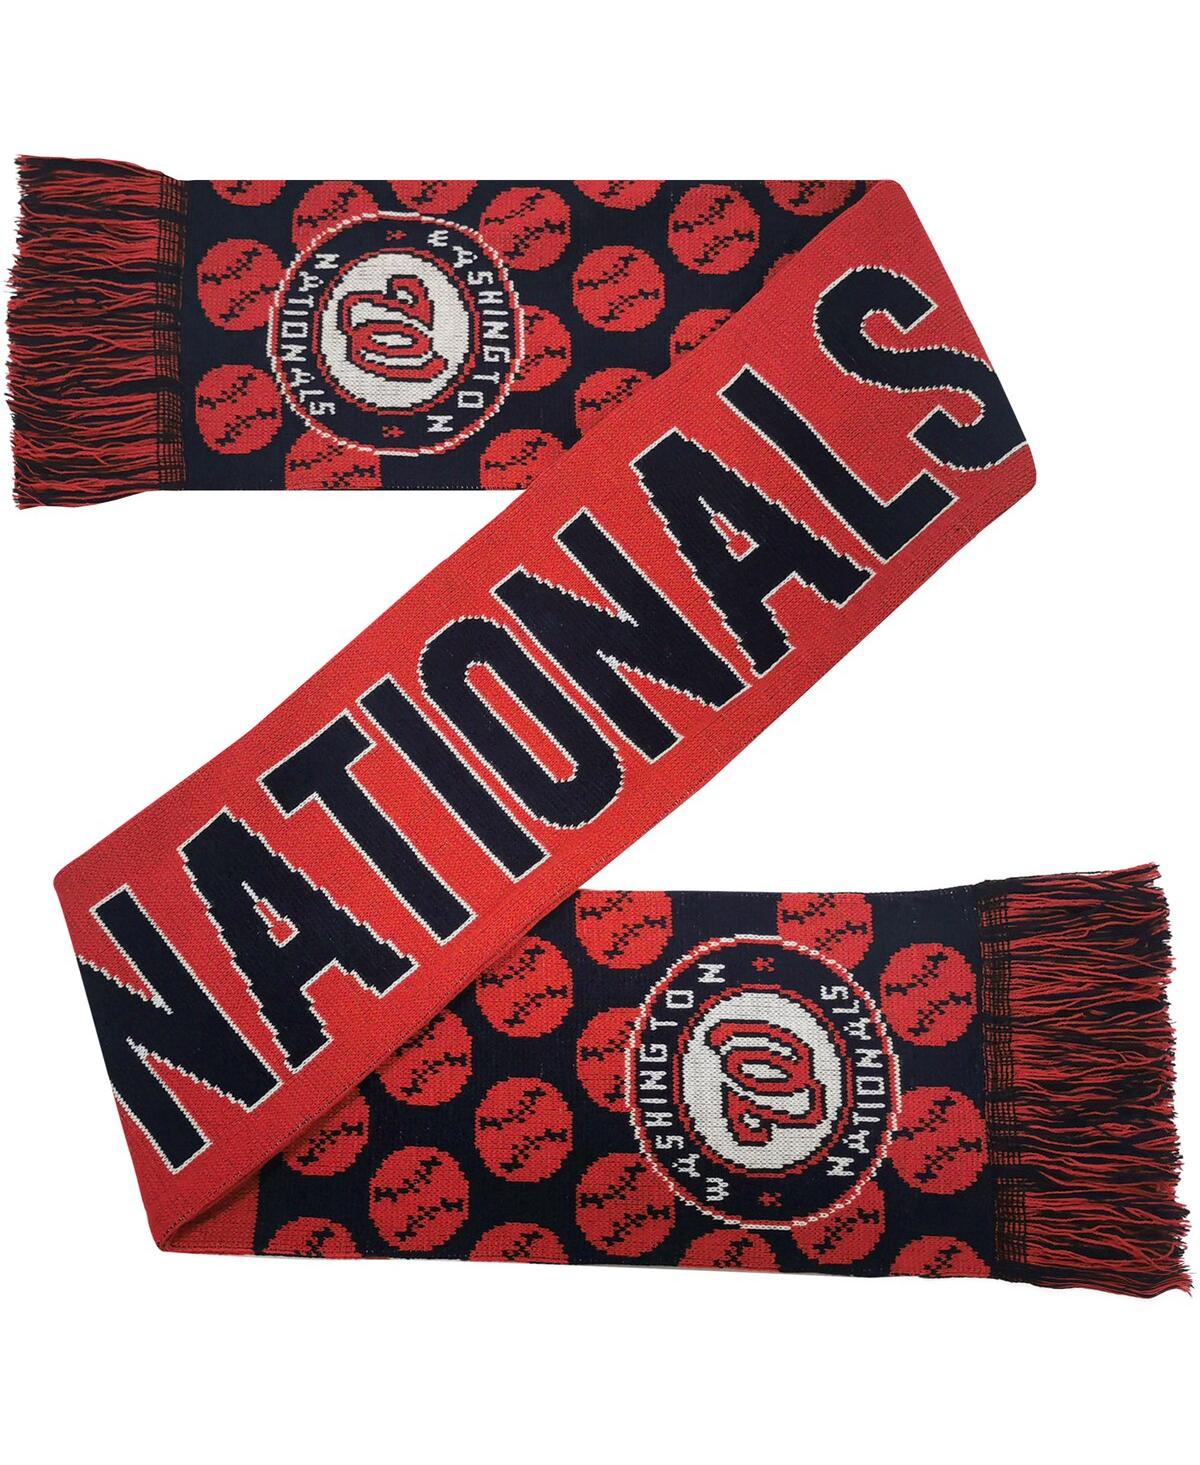 Men's and Women's Foco Washington Nationals Reversible Thematic Scarf - Red